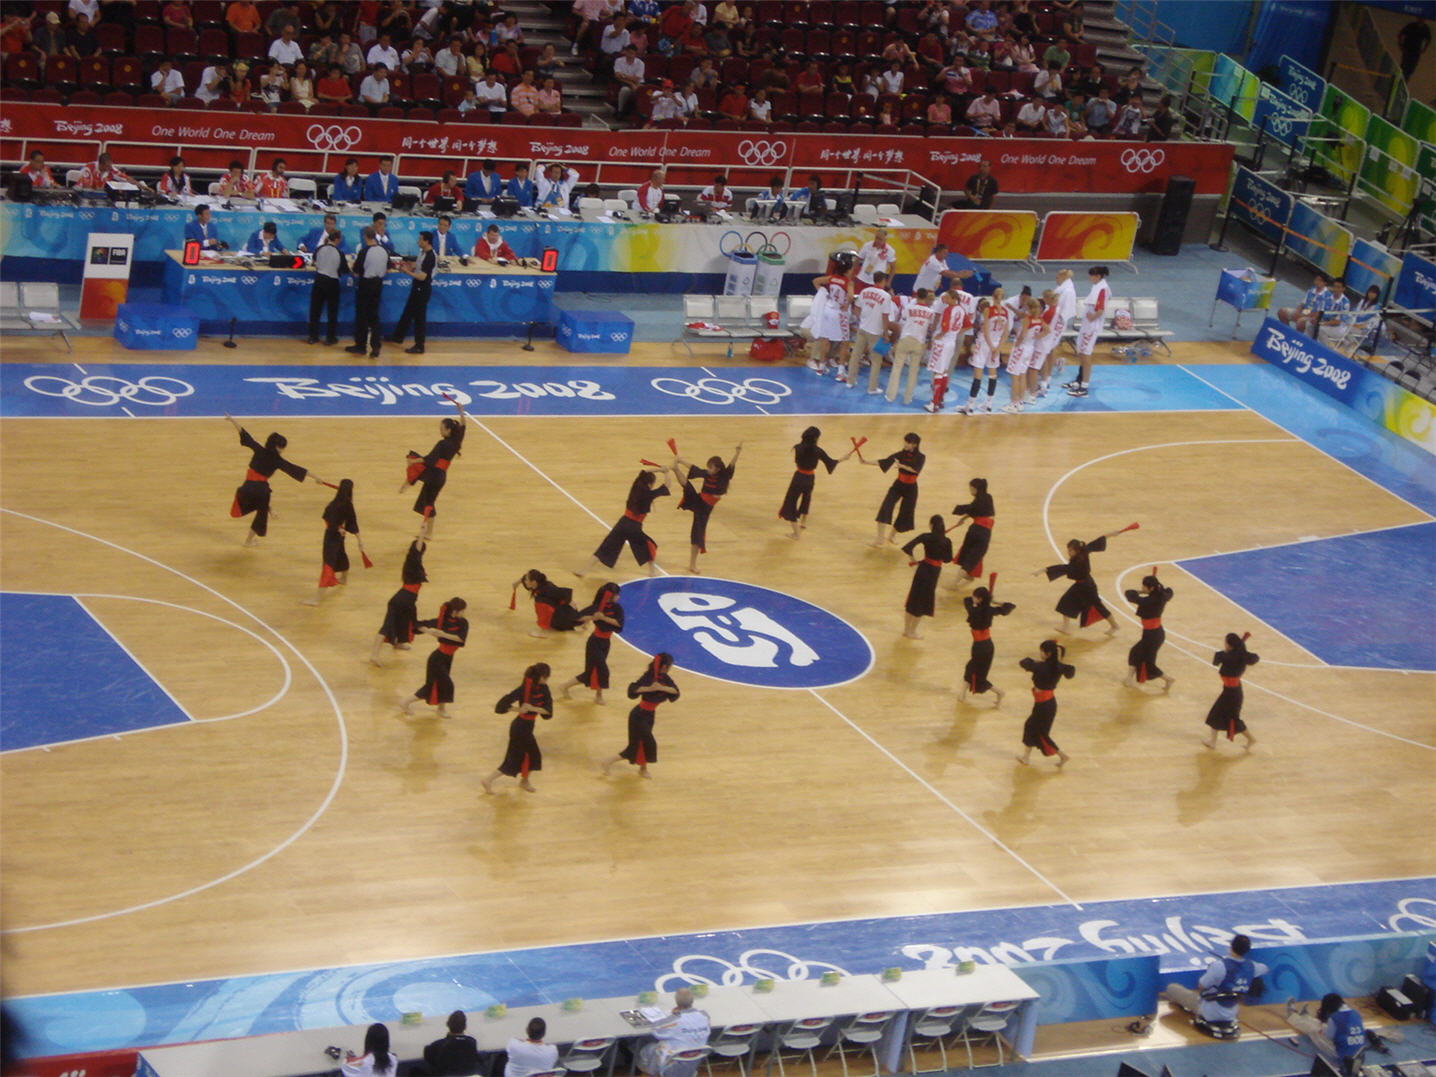 a group of people perform in a court